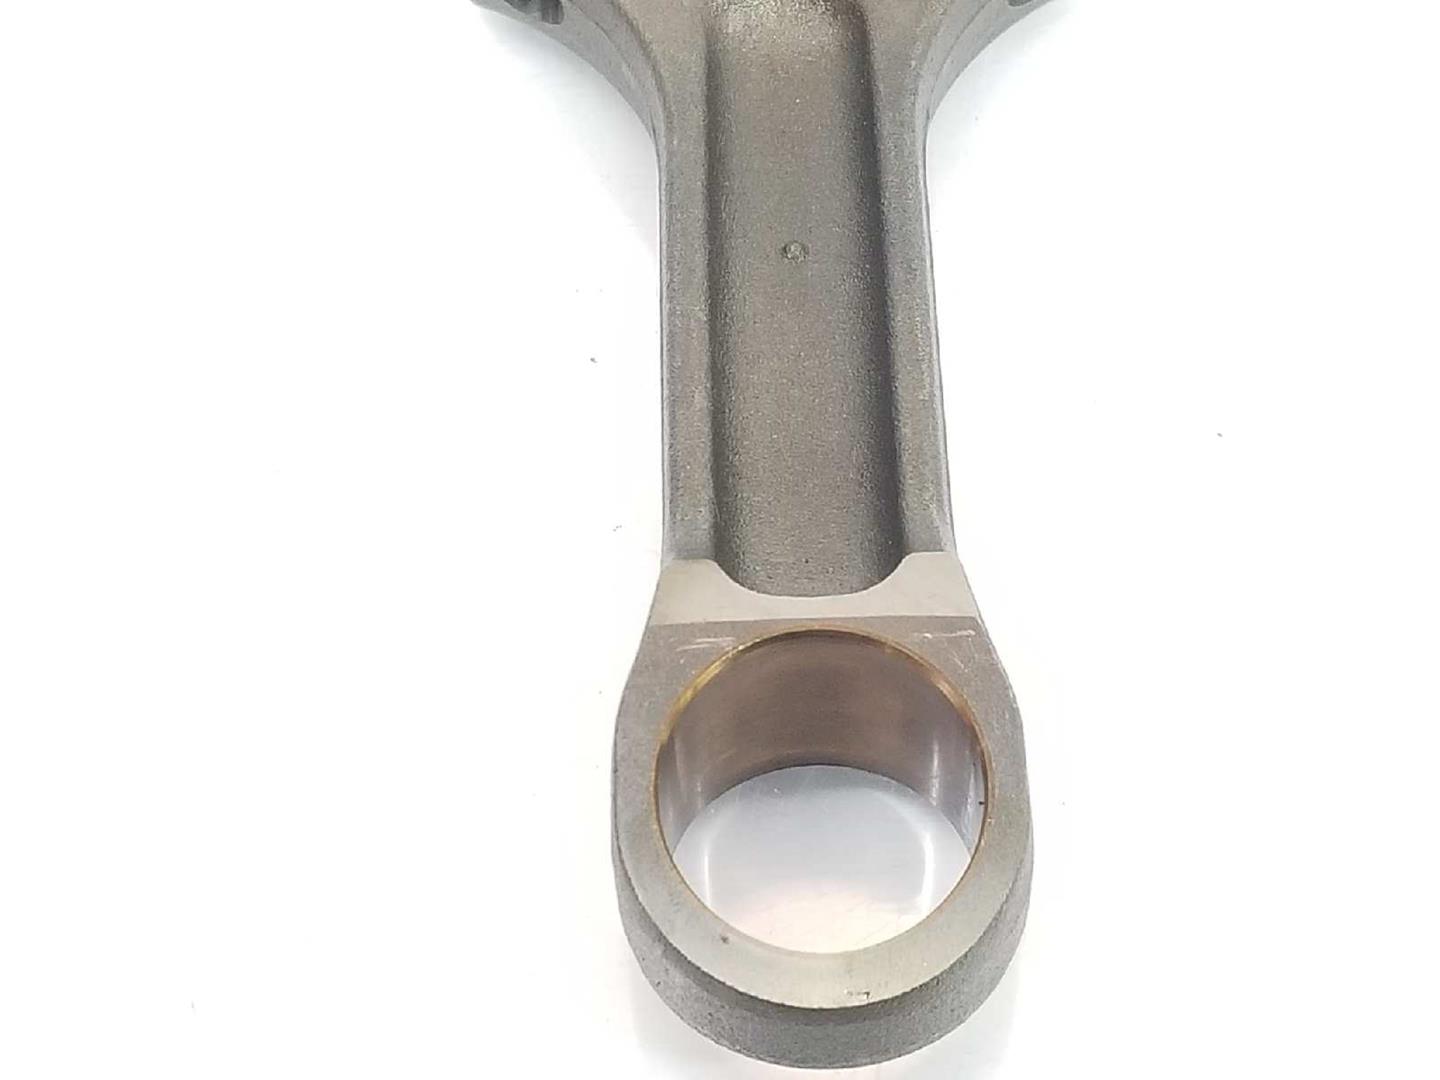 BMW X3 E83 (2003-2010) Connecting Rod 11247798368, 11247798368 19726855